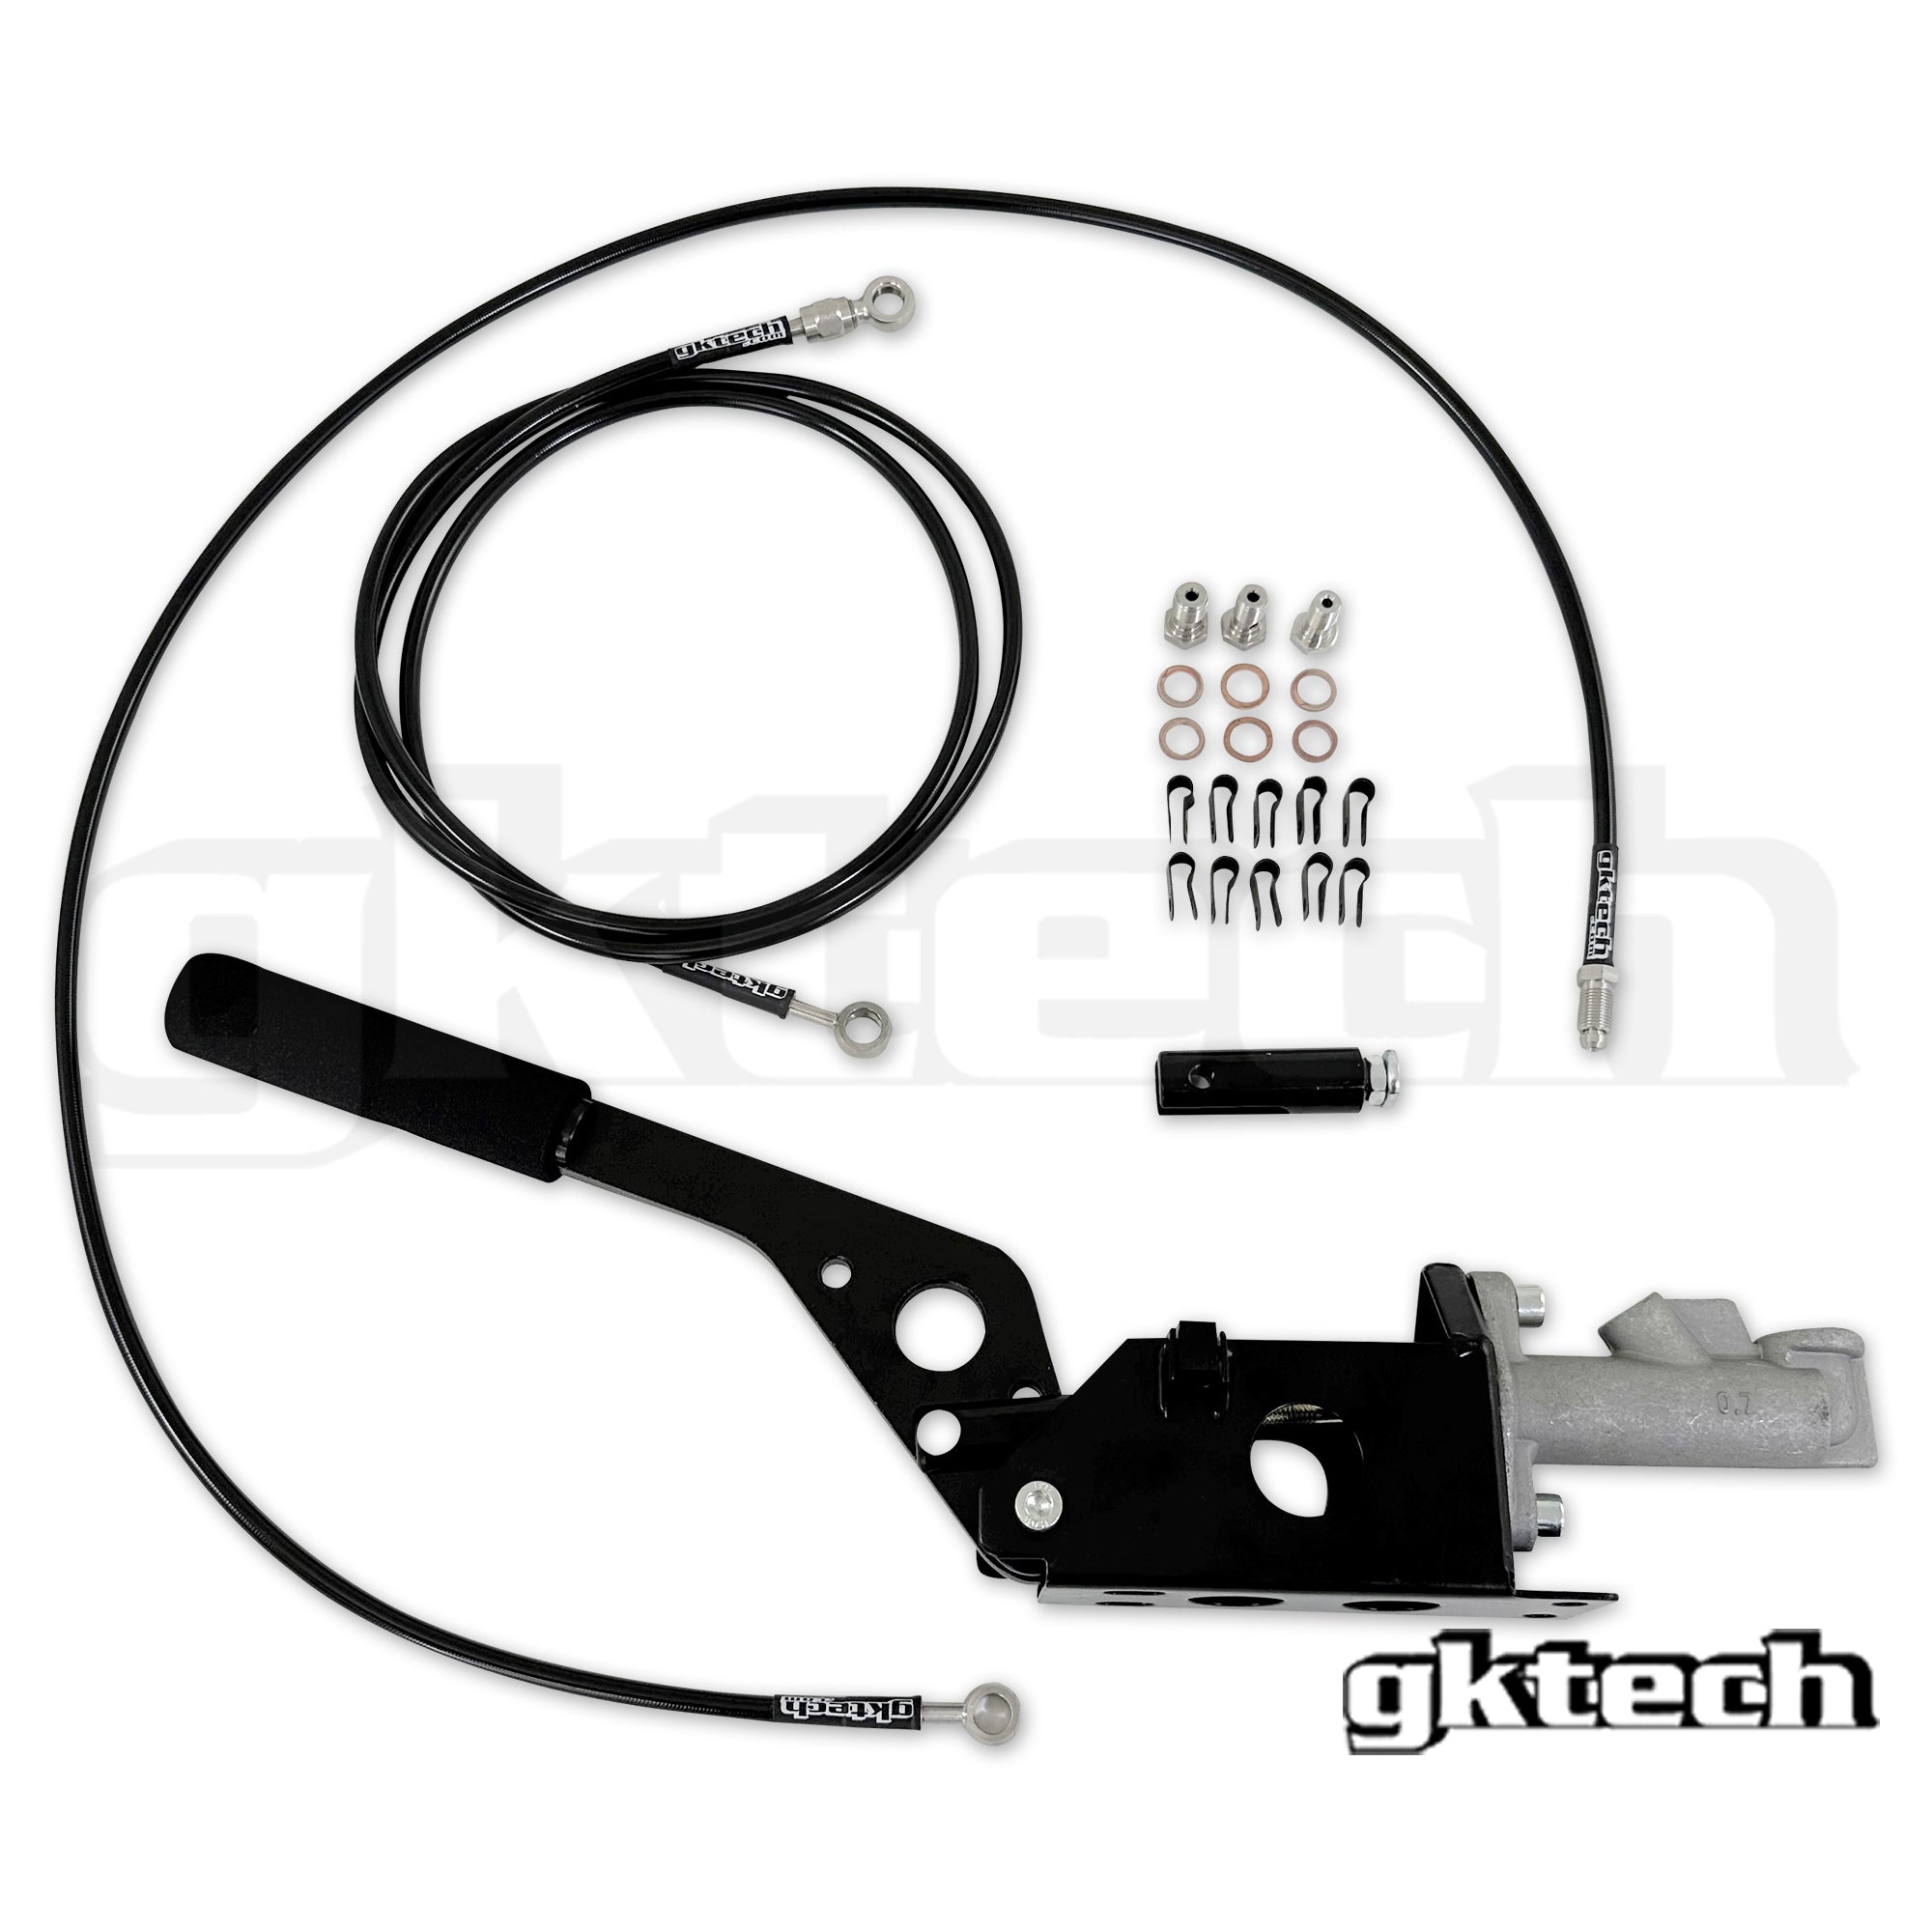 Budget hydraulic handbrake assembly and in-line braided line kit